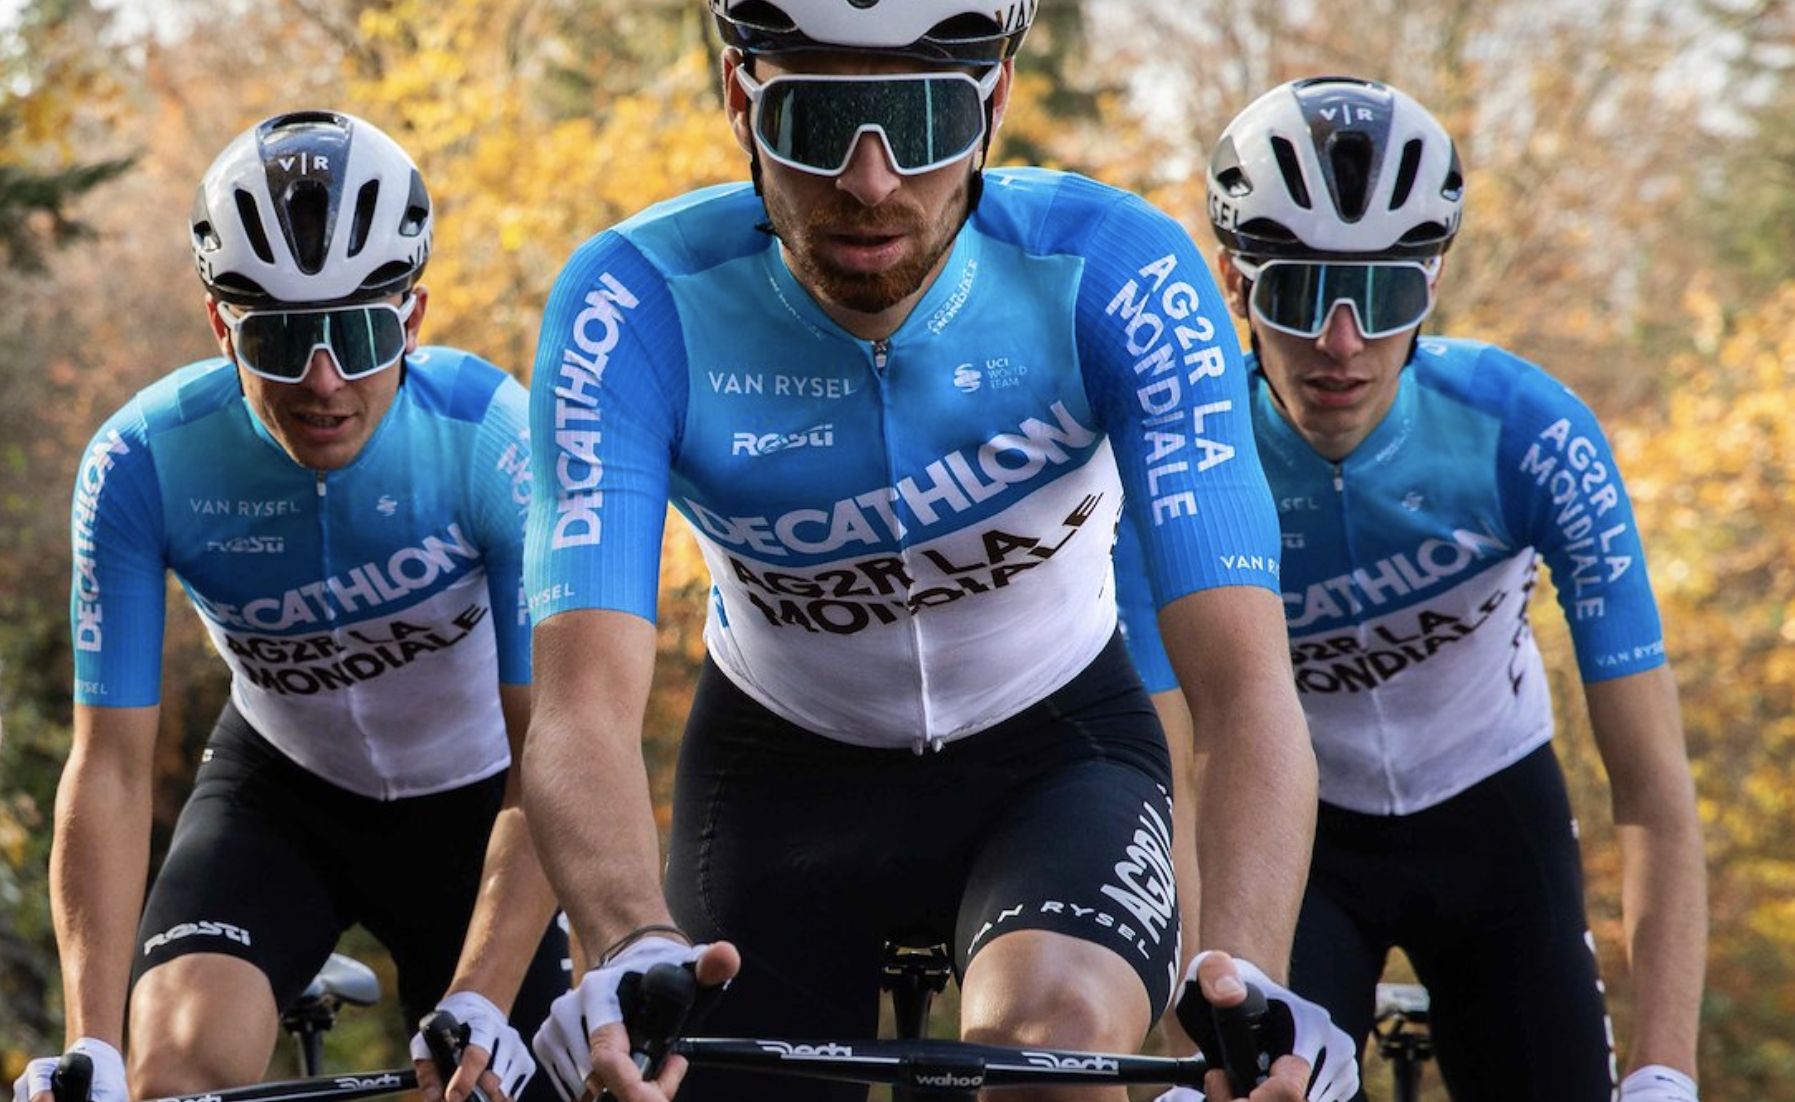 This World Tour team will have Decathlon as sponsor and Van Rysel bikes in  2024